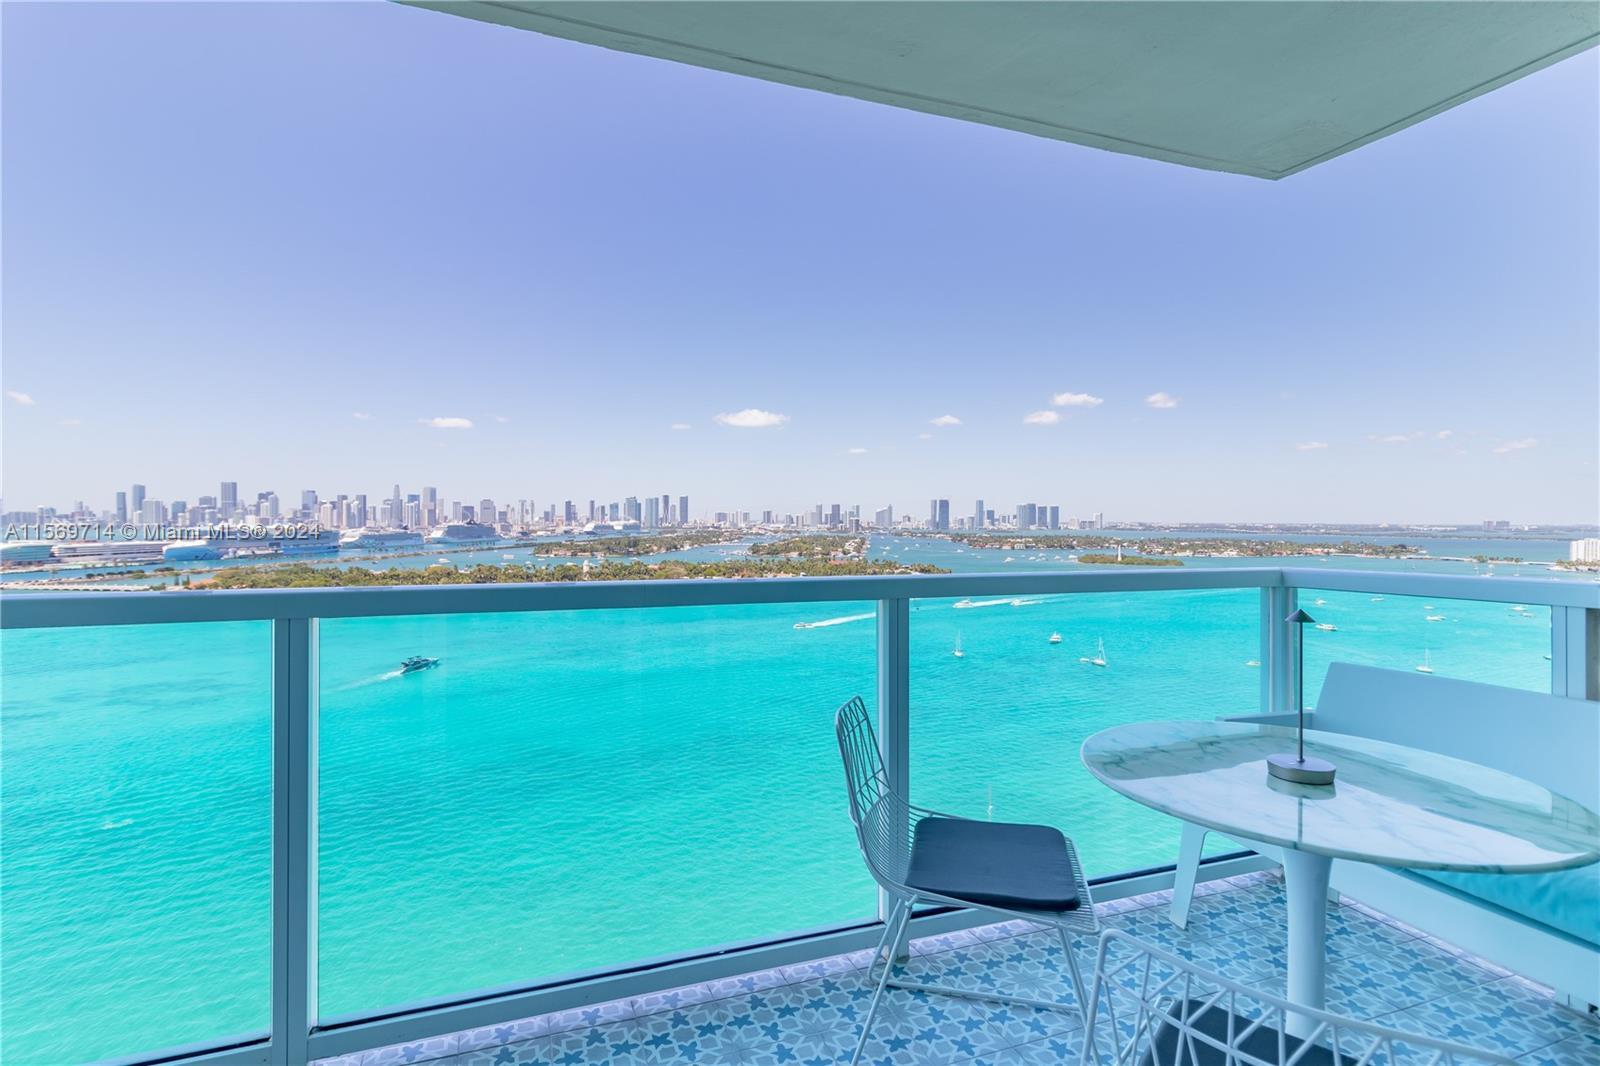 Incredible views from this high floor fully furnished direct bayfront residence at The Floridian! Co